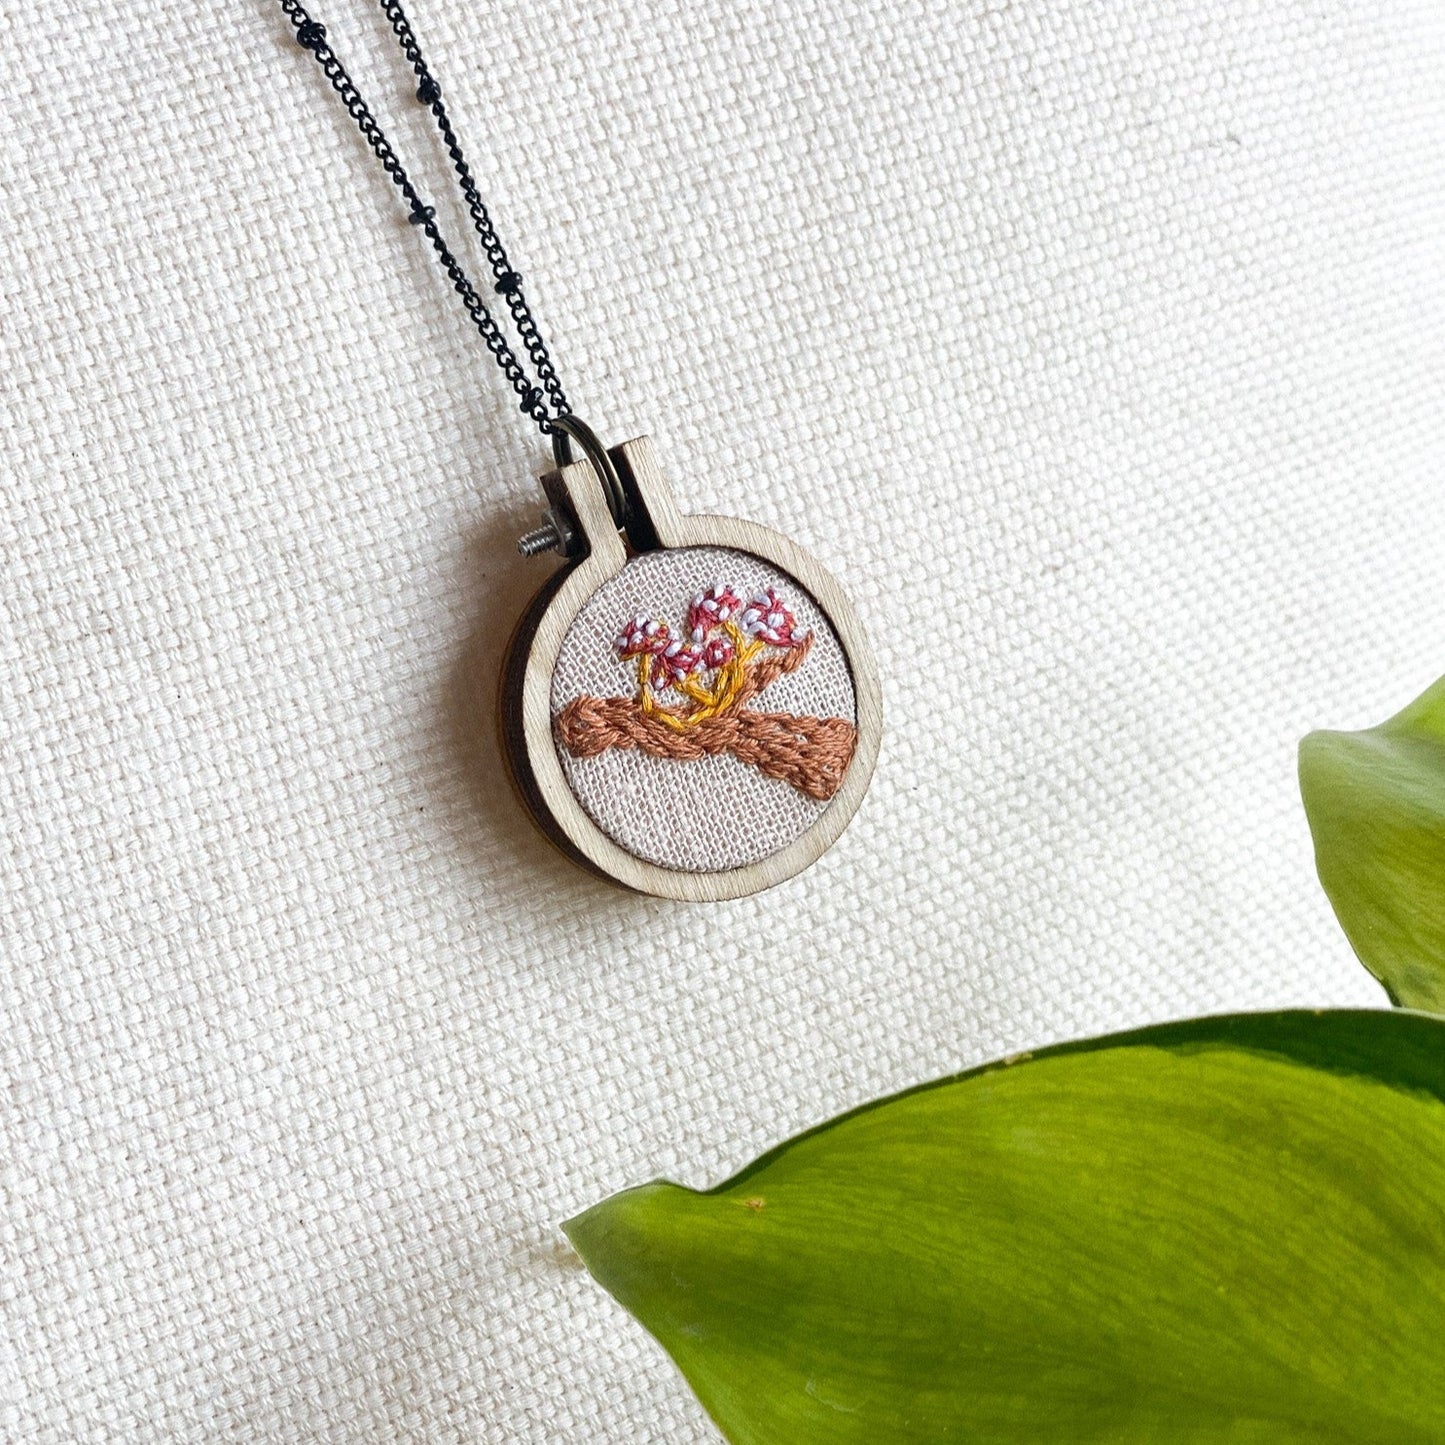 Amanita Growth Necklace by Brittany Montour